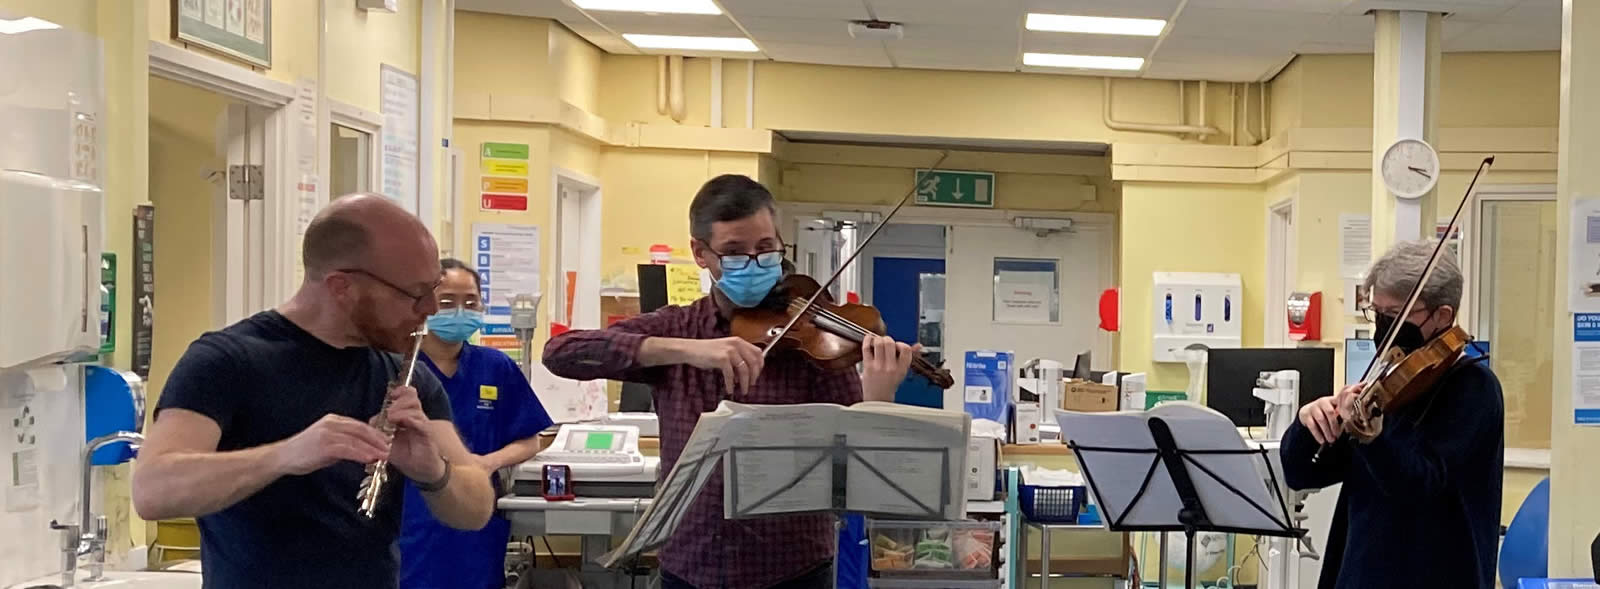 Three musicians play flute and violins in a hospital ward setting